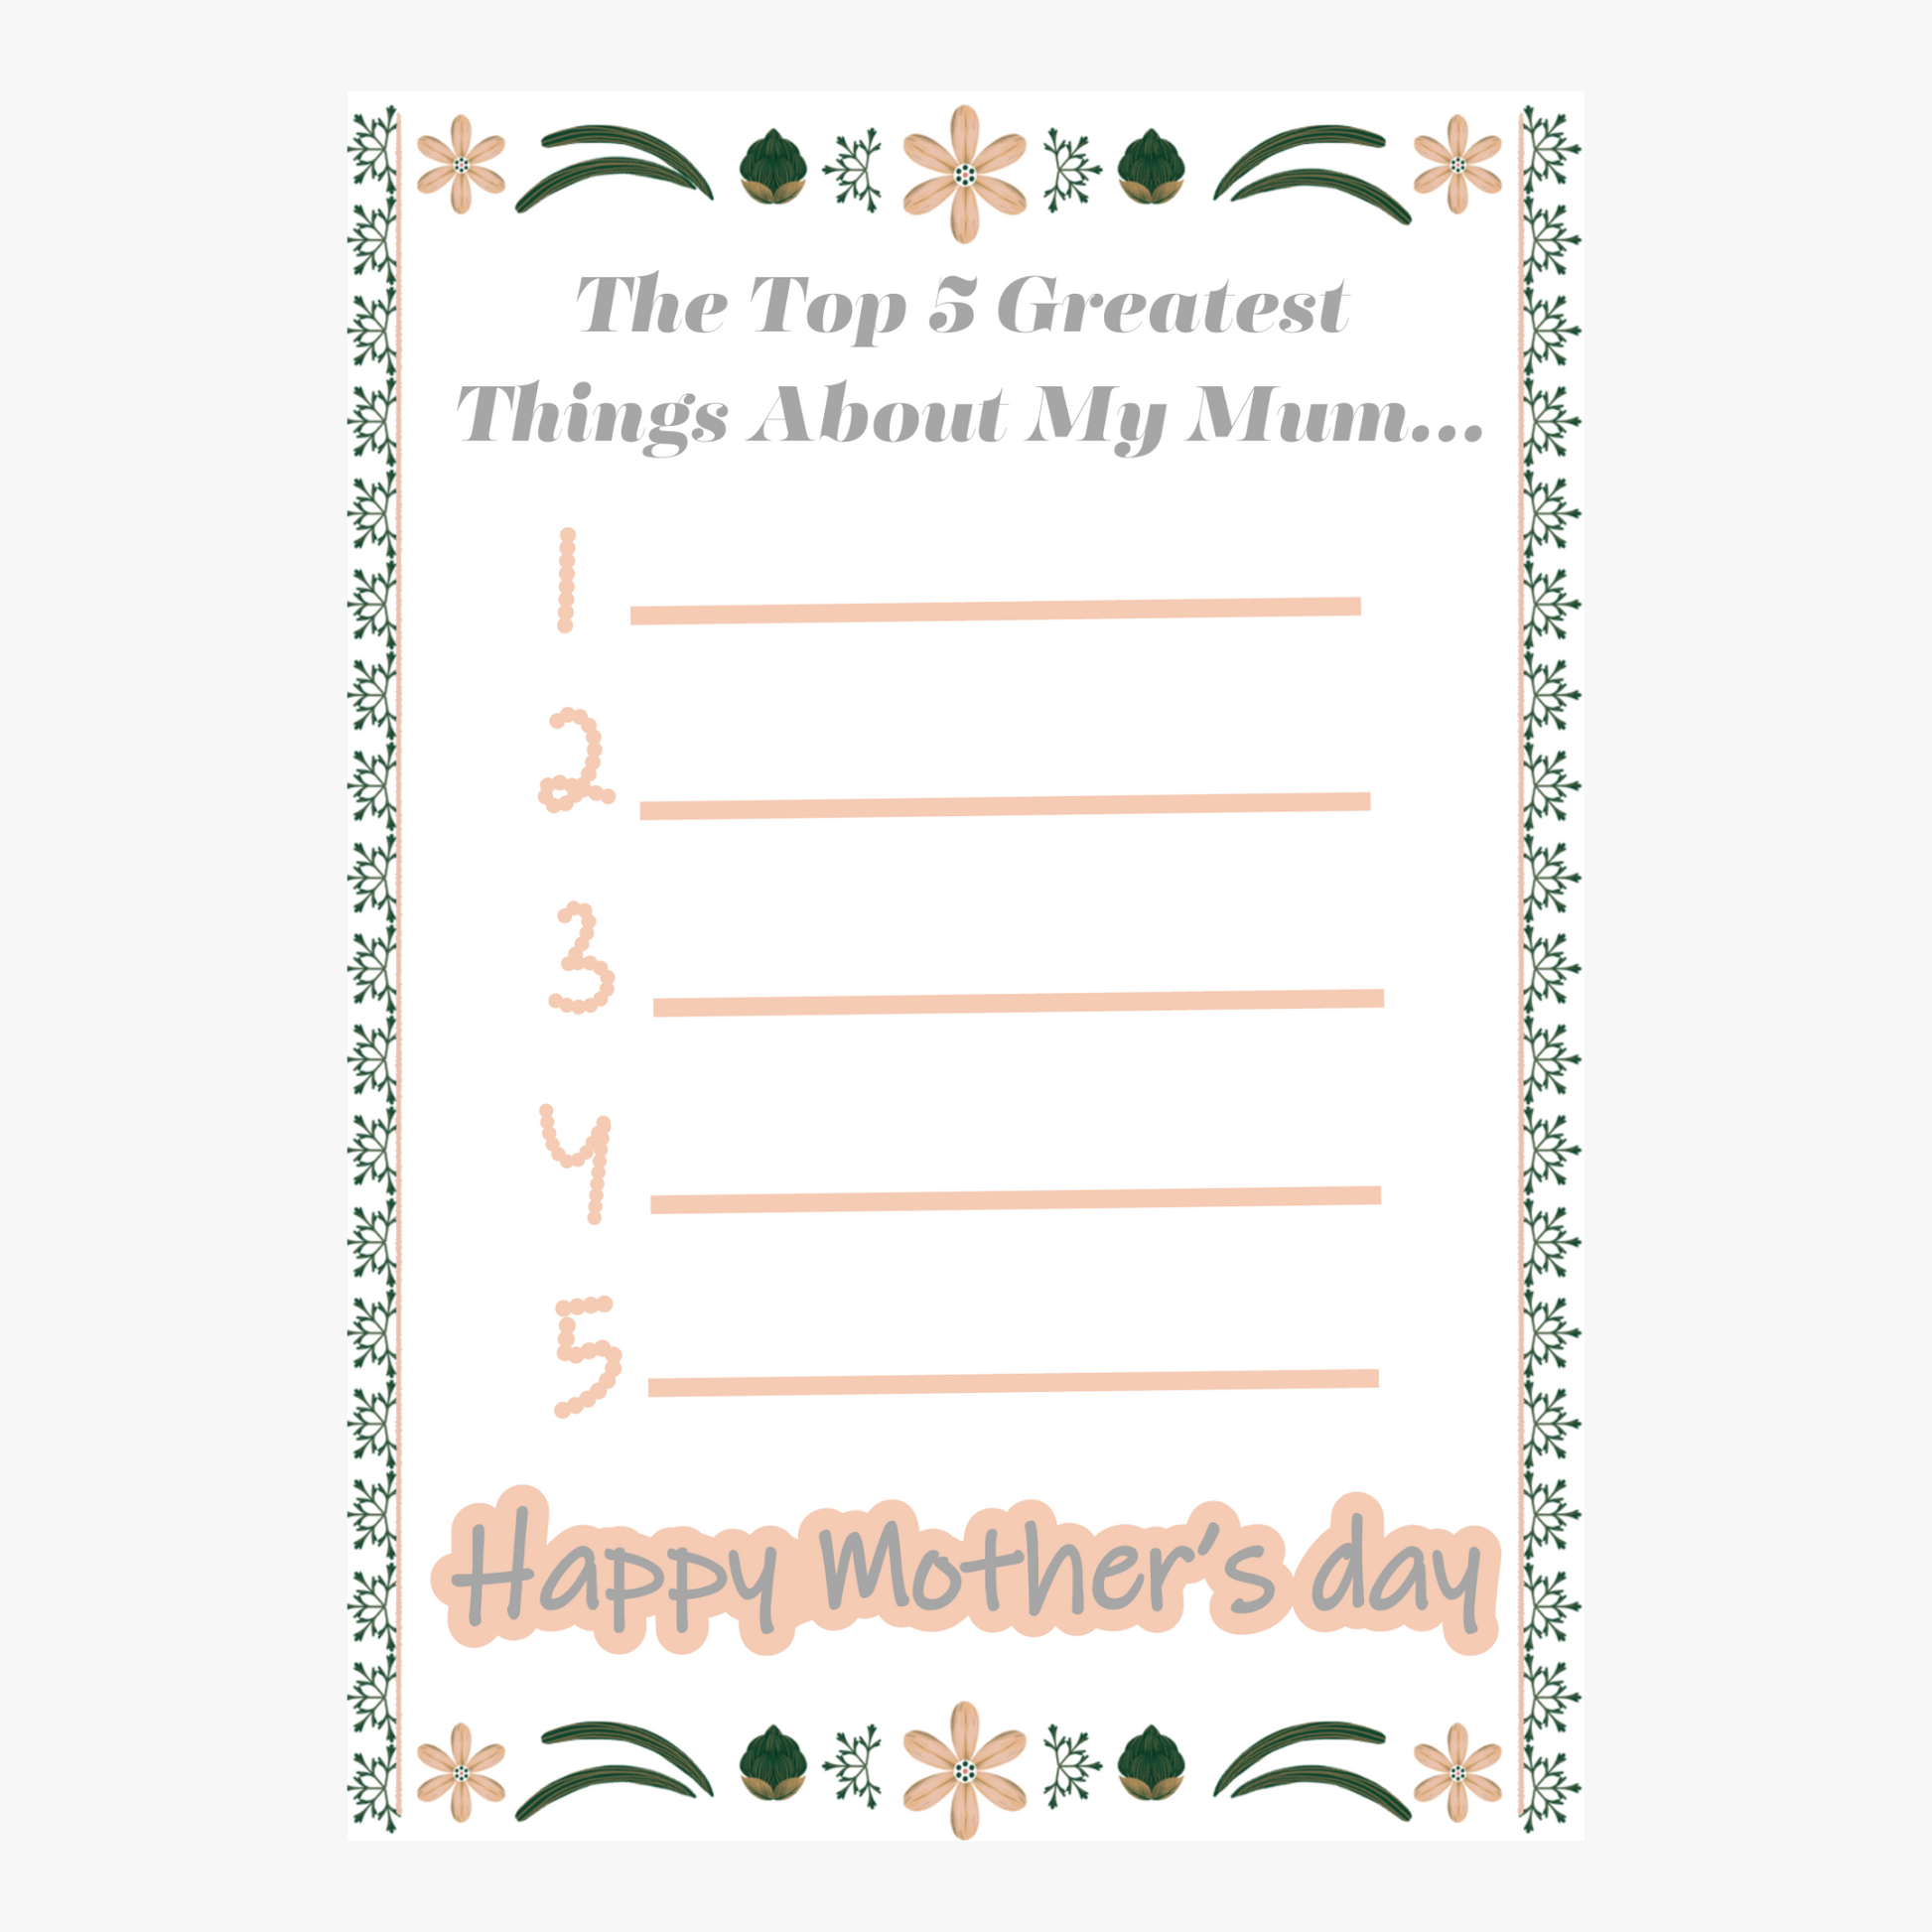 Greatest Things About Mum - Mothers Day PDF Download